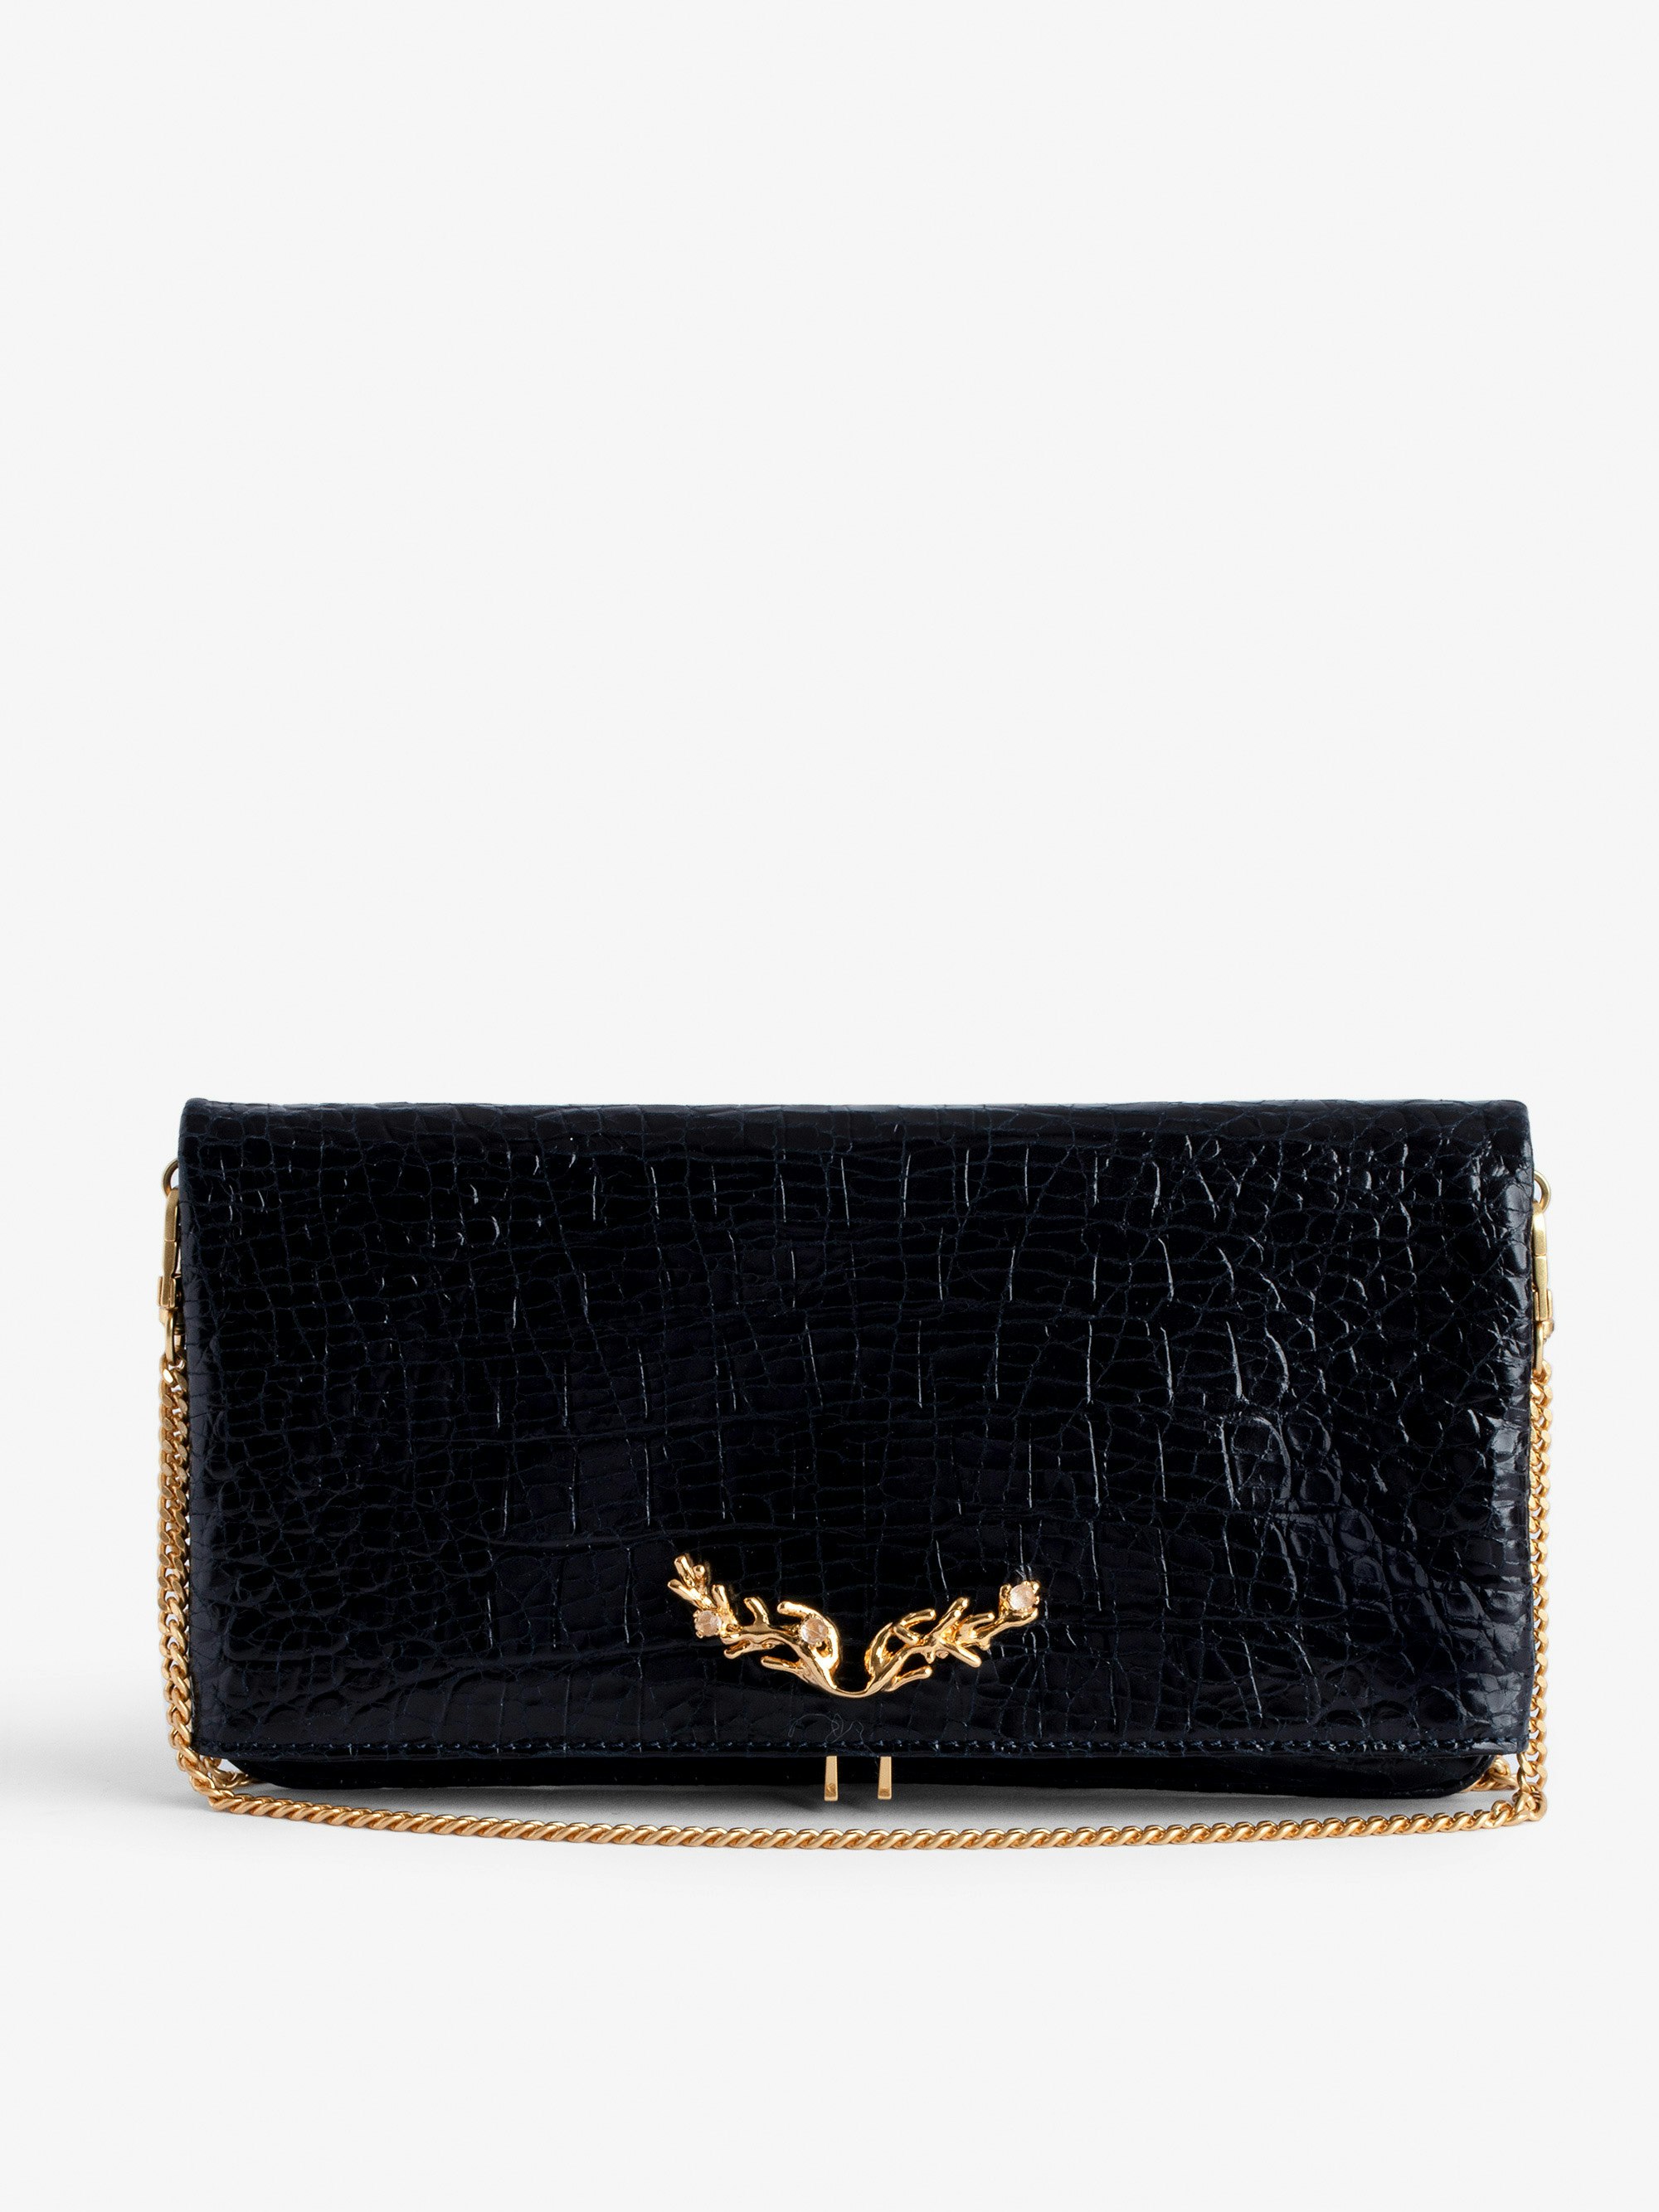  Goossens Rock Embossed Clutch - Rock navy blue croc-embossed leather clutch with gold-tone metal chain.